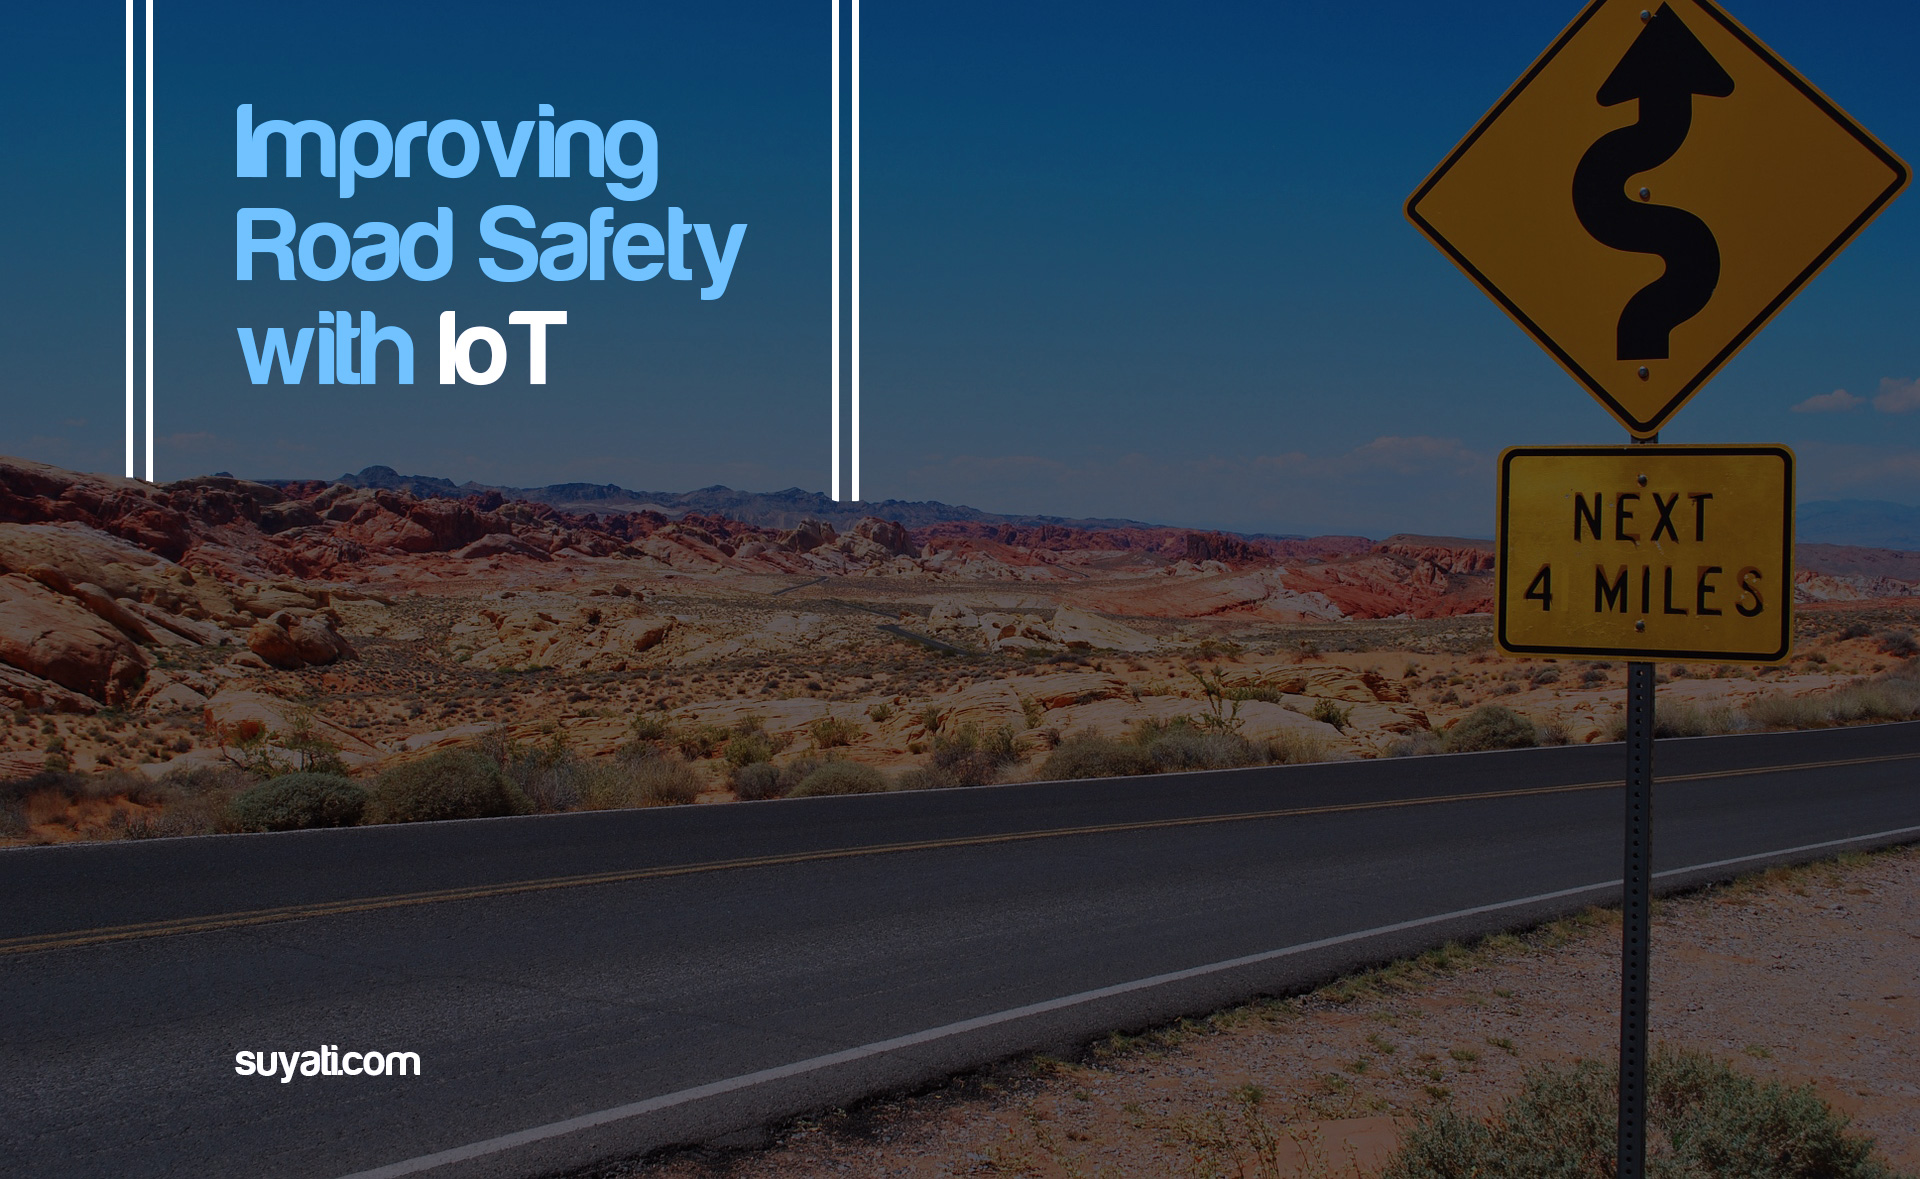 Role of IoT in Road Safety